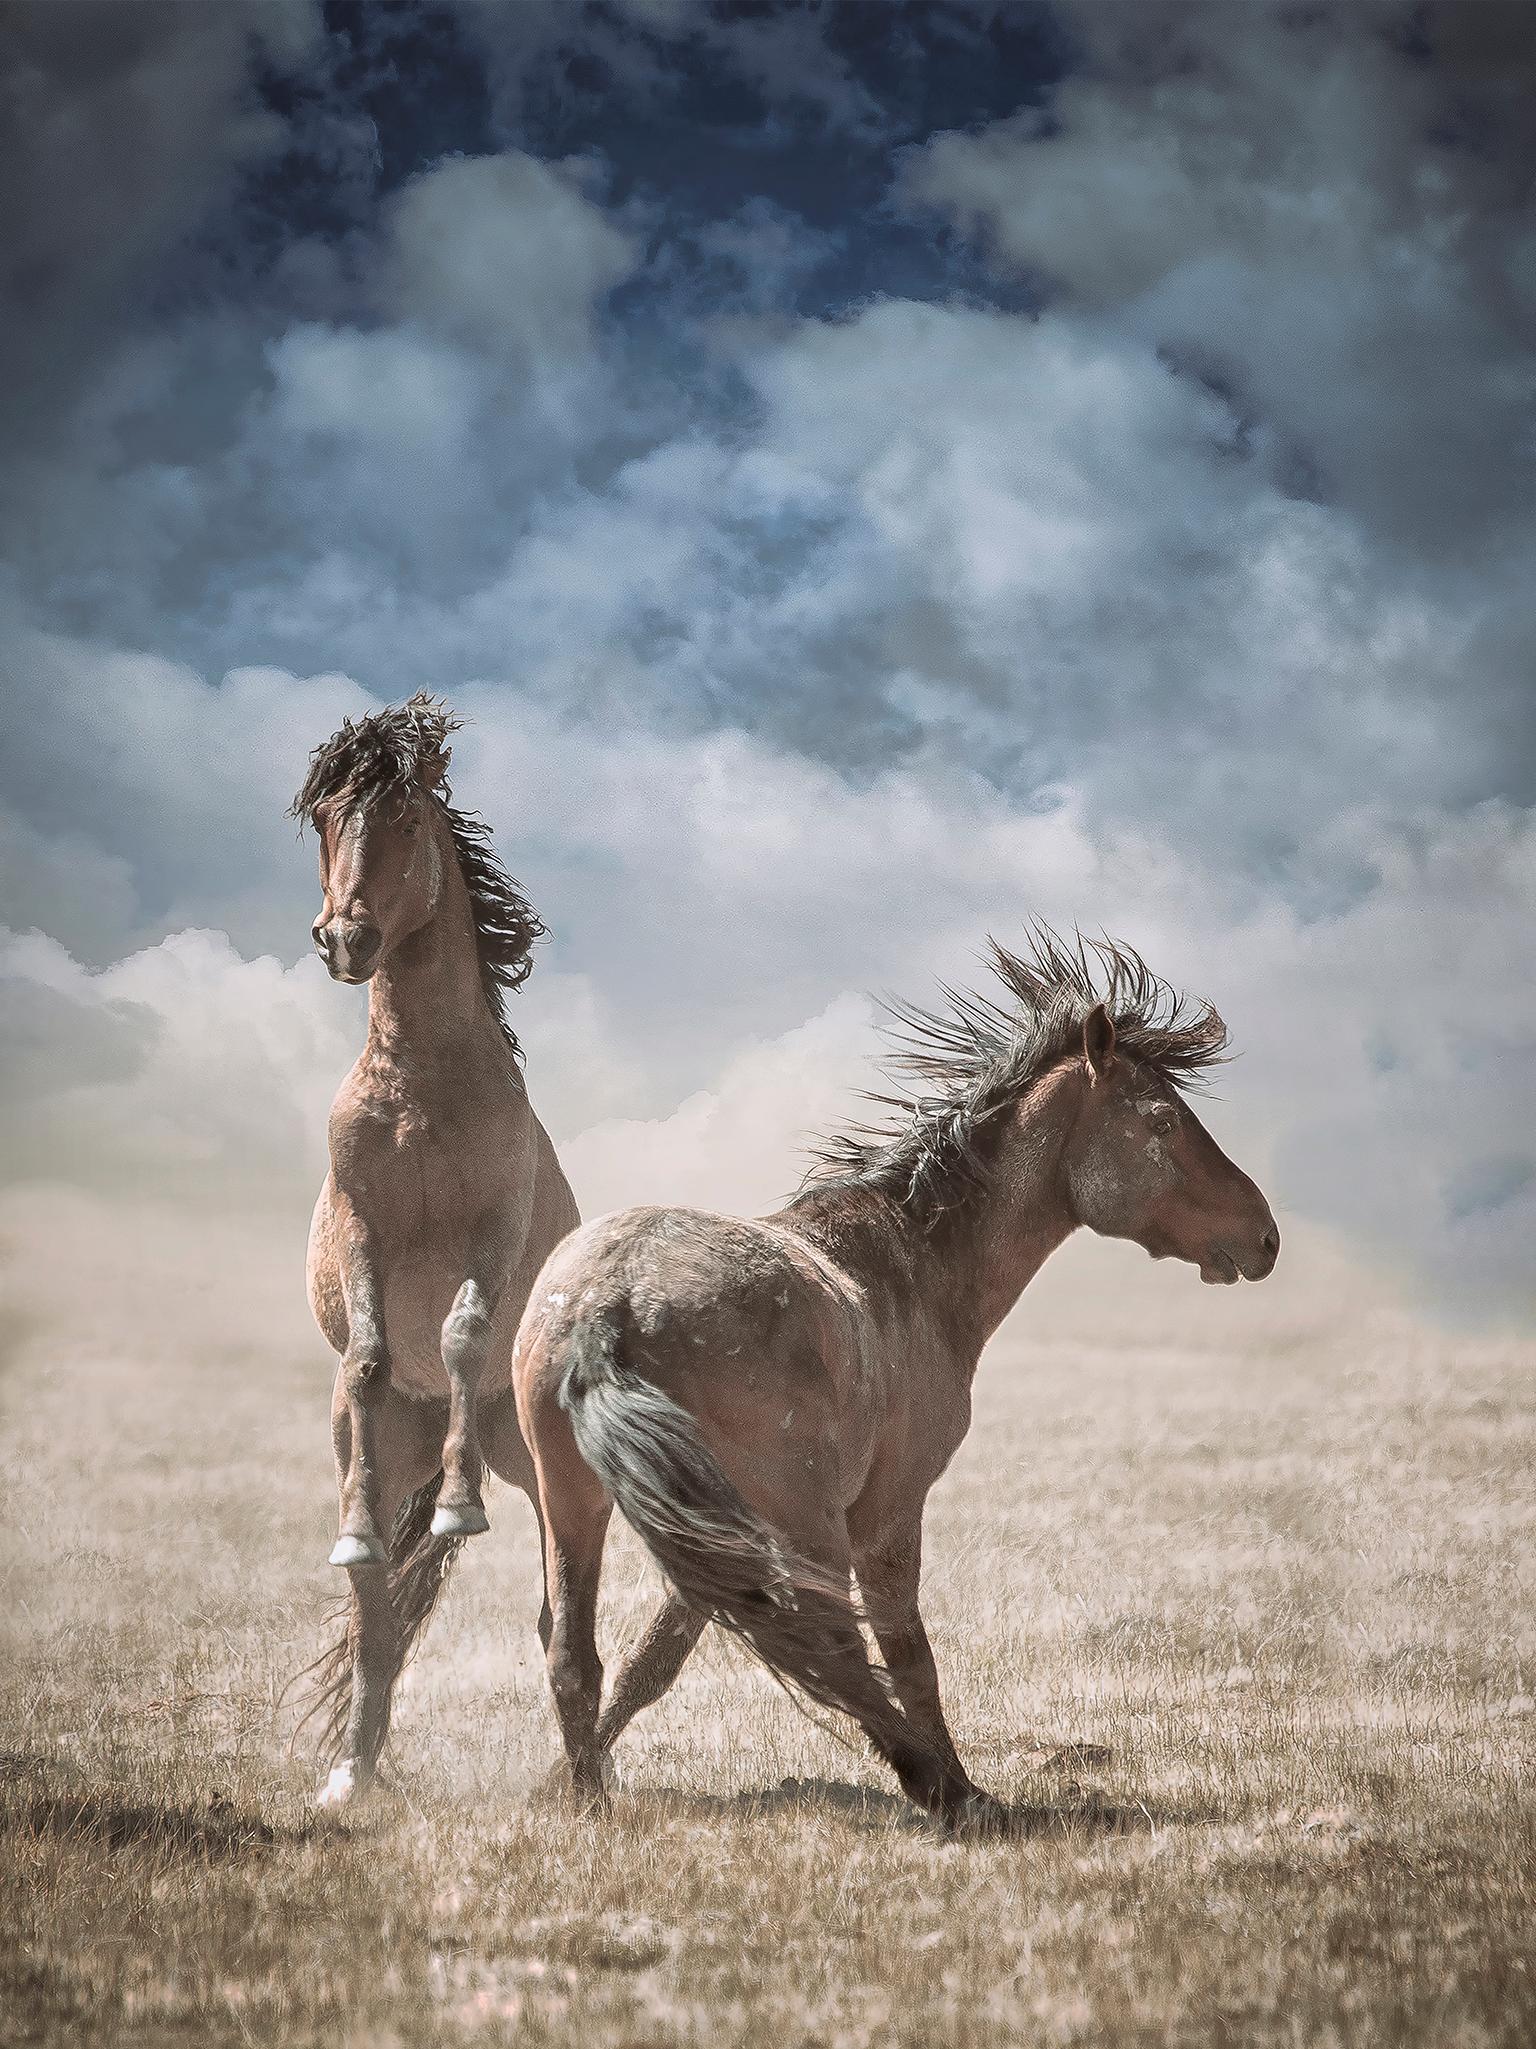 Shane Russeck Black and White Photograph -  Wonder Horses 40x 60 - Wild Horses Photograph - Wild Mustangs Photography 